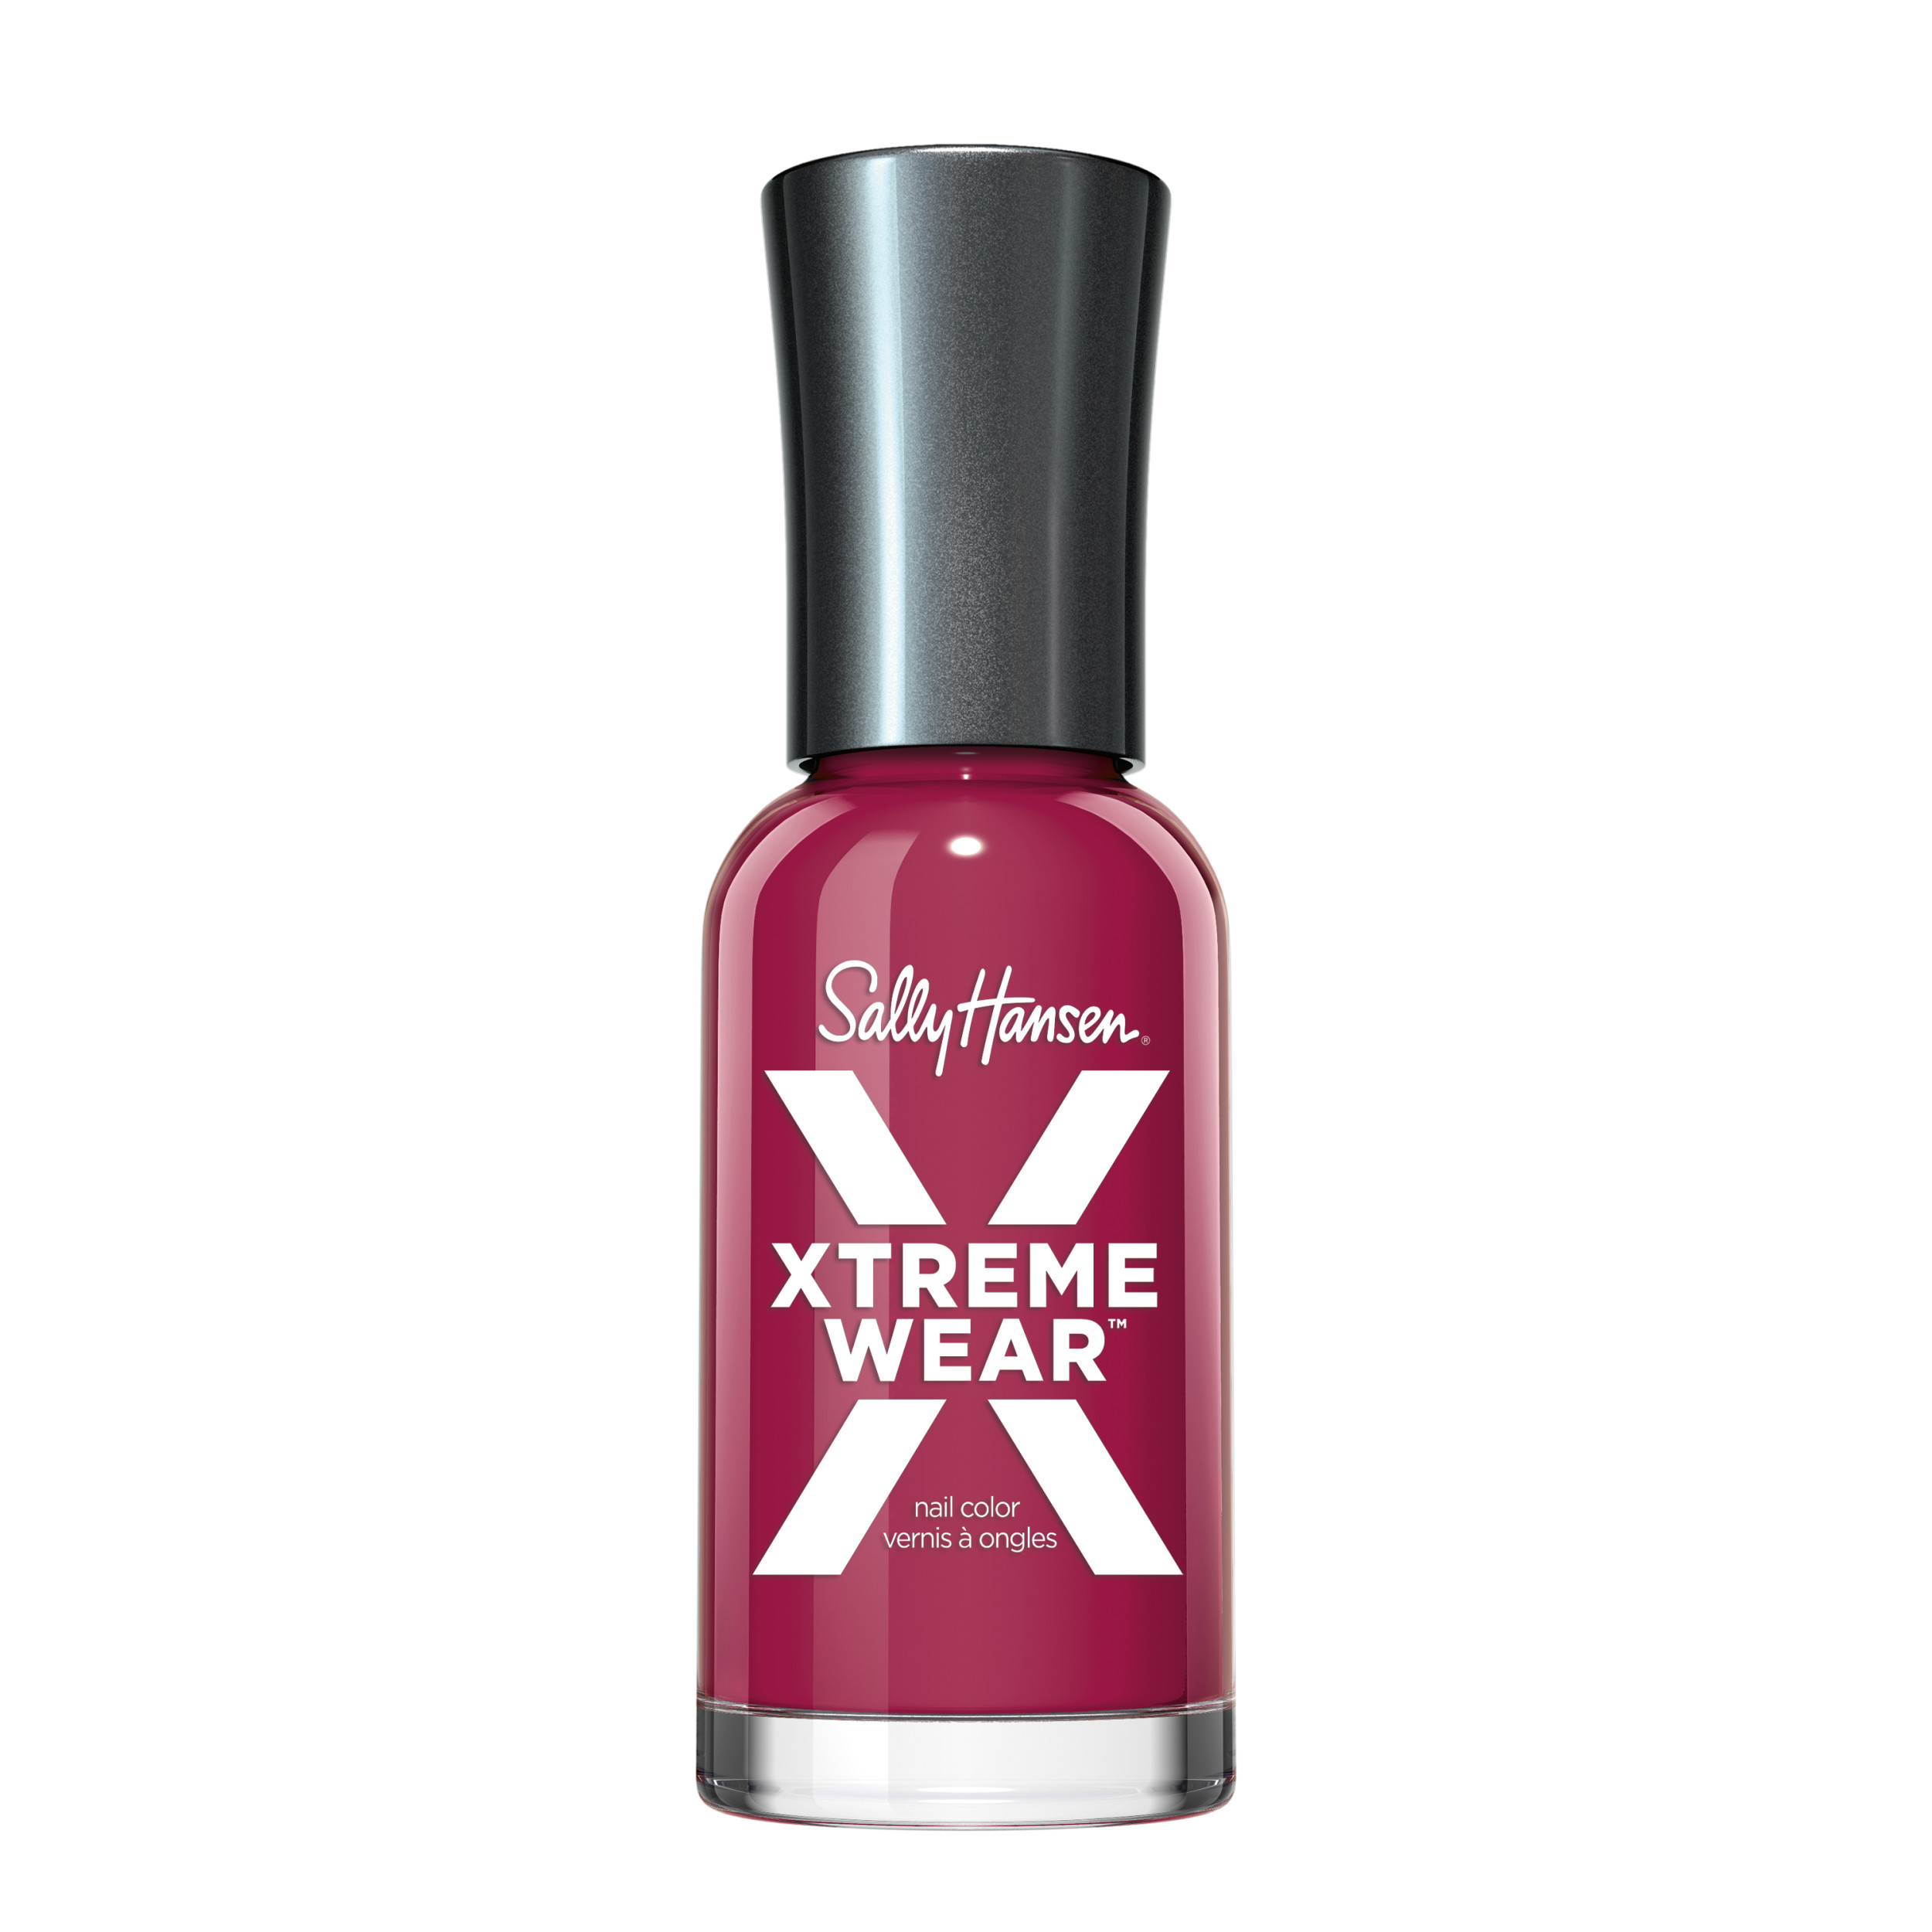 Sally Hansen Xtreme Wear Nail Polish, Feeling Wine, 0.4 oz, Chip Resistant, Bold Color - image 1 of 14